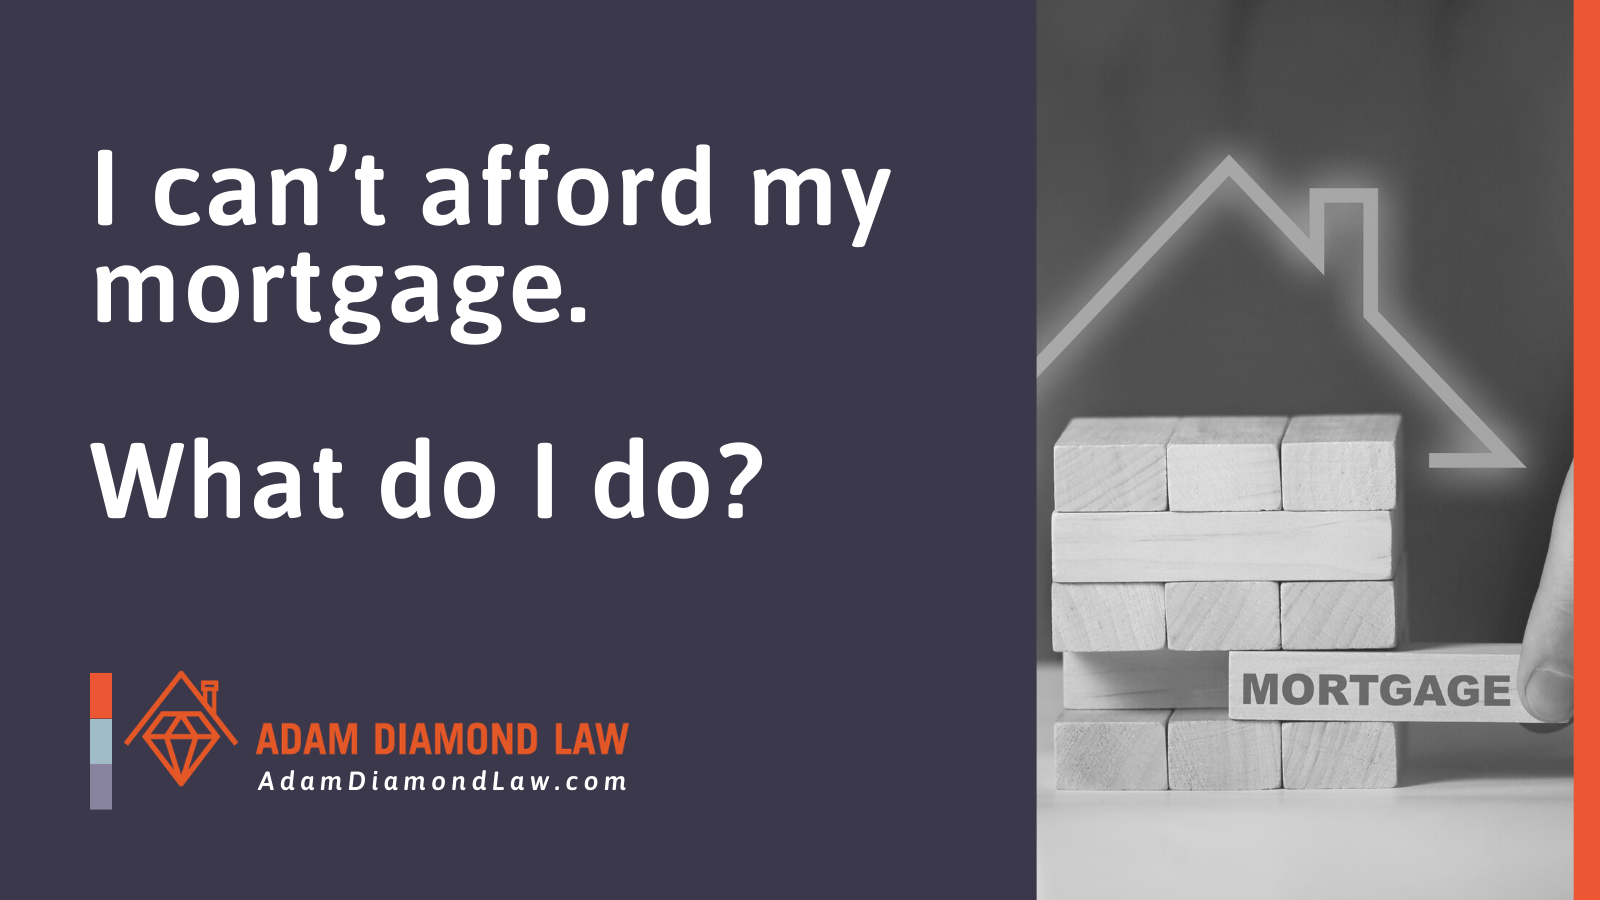 I can’t afford my mortgage. What do I do? Adam Diamond Law